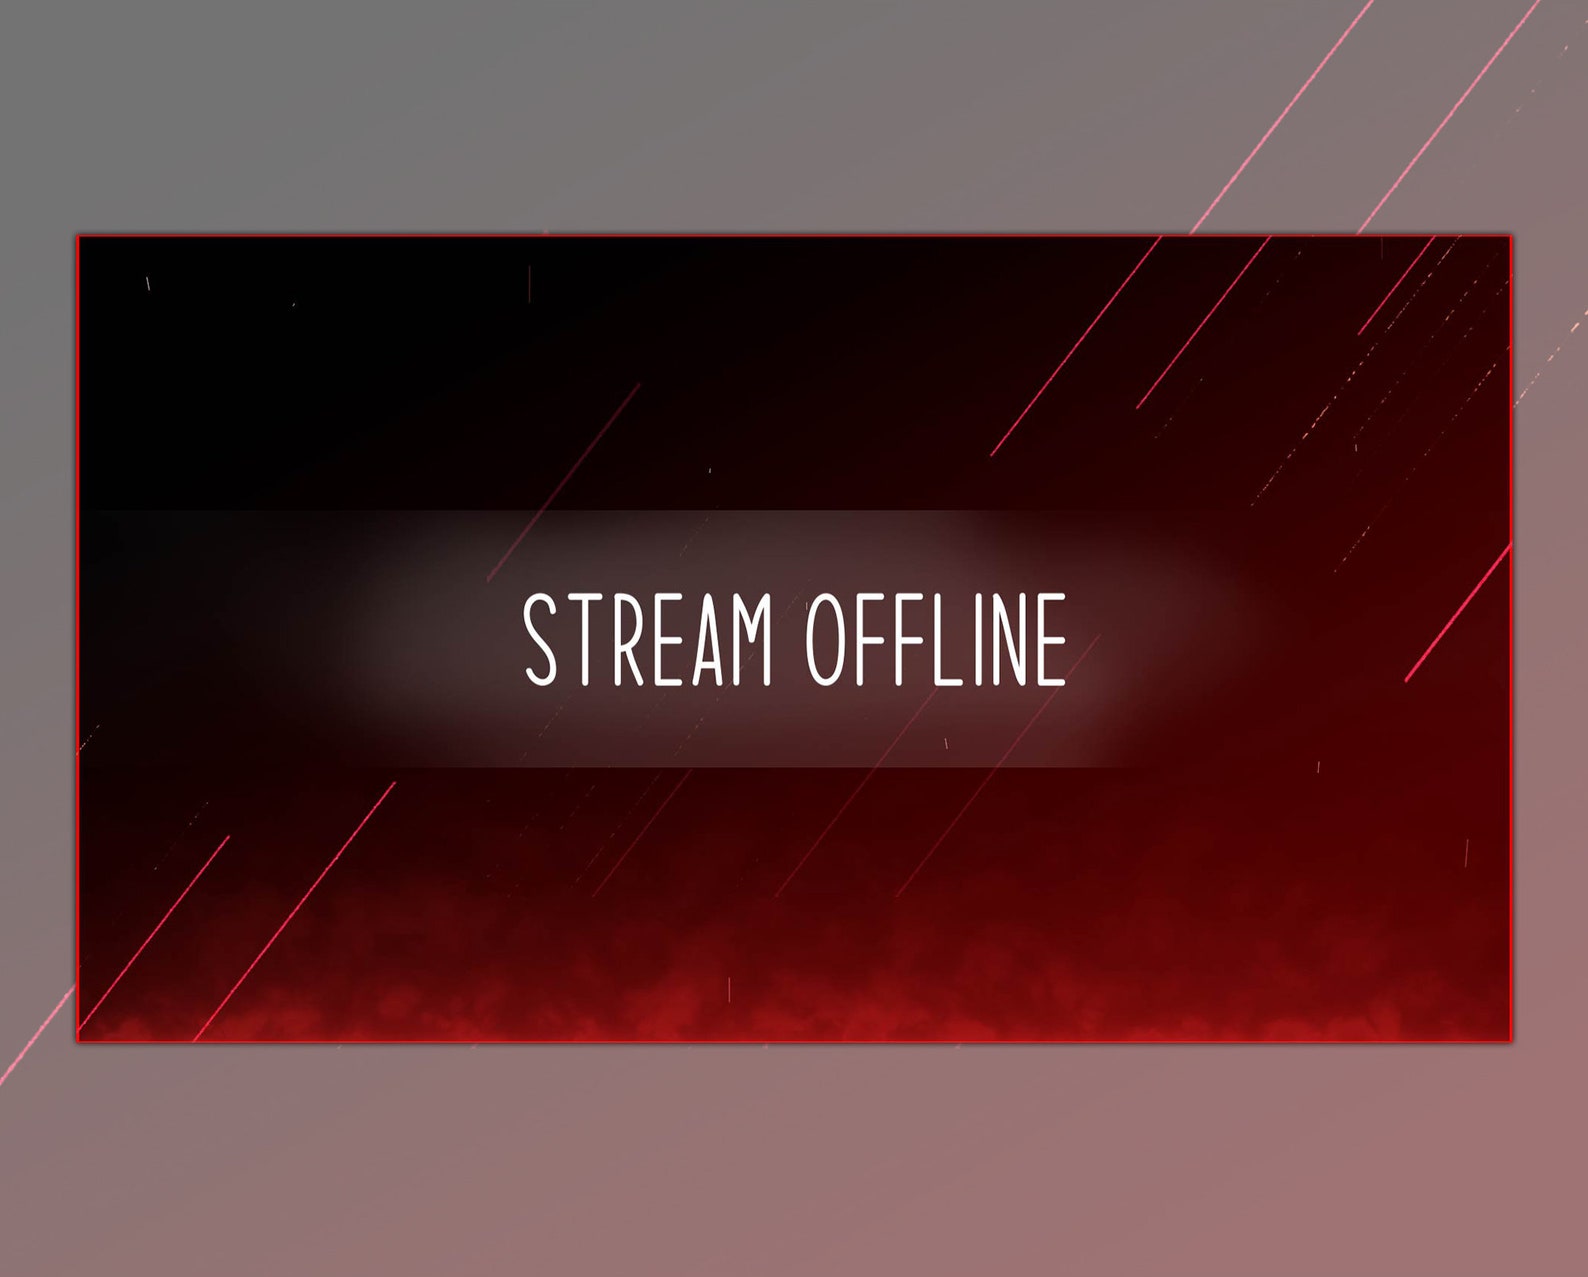 Animated Twitch Overlay Red Line Simple Minimalist Screens Etsy